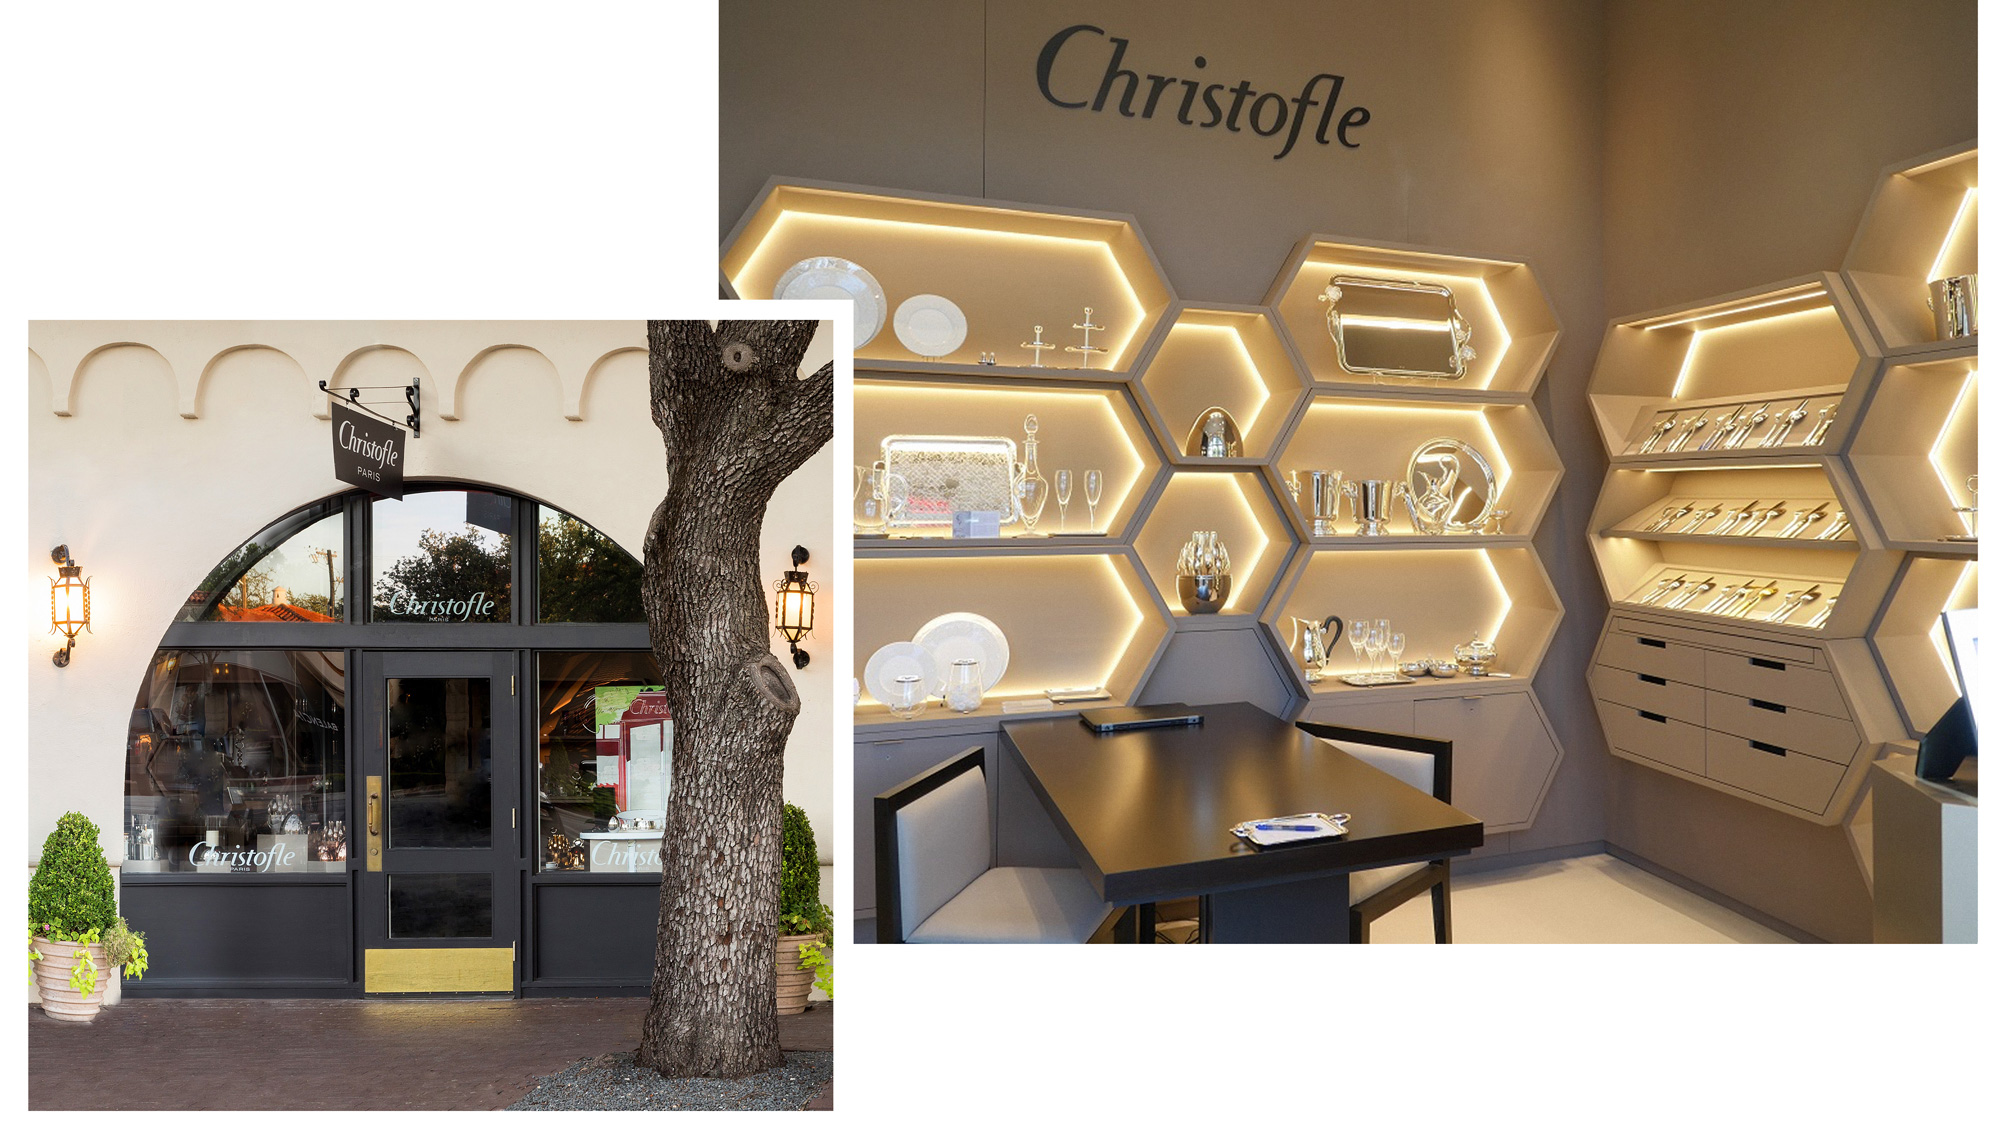 The Christofle boutique opened in Highland Park Village in 2016 and is the second location in Texas.